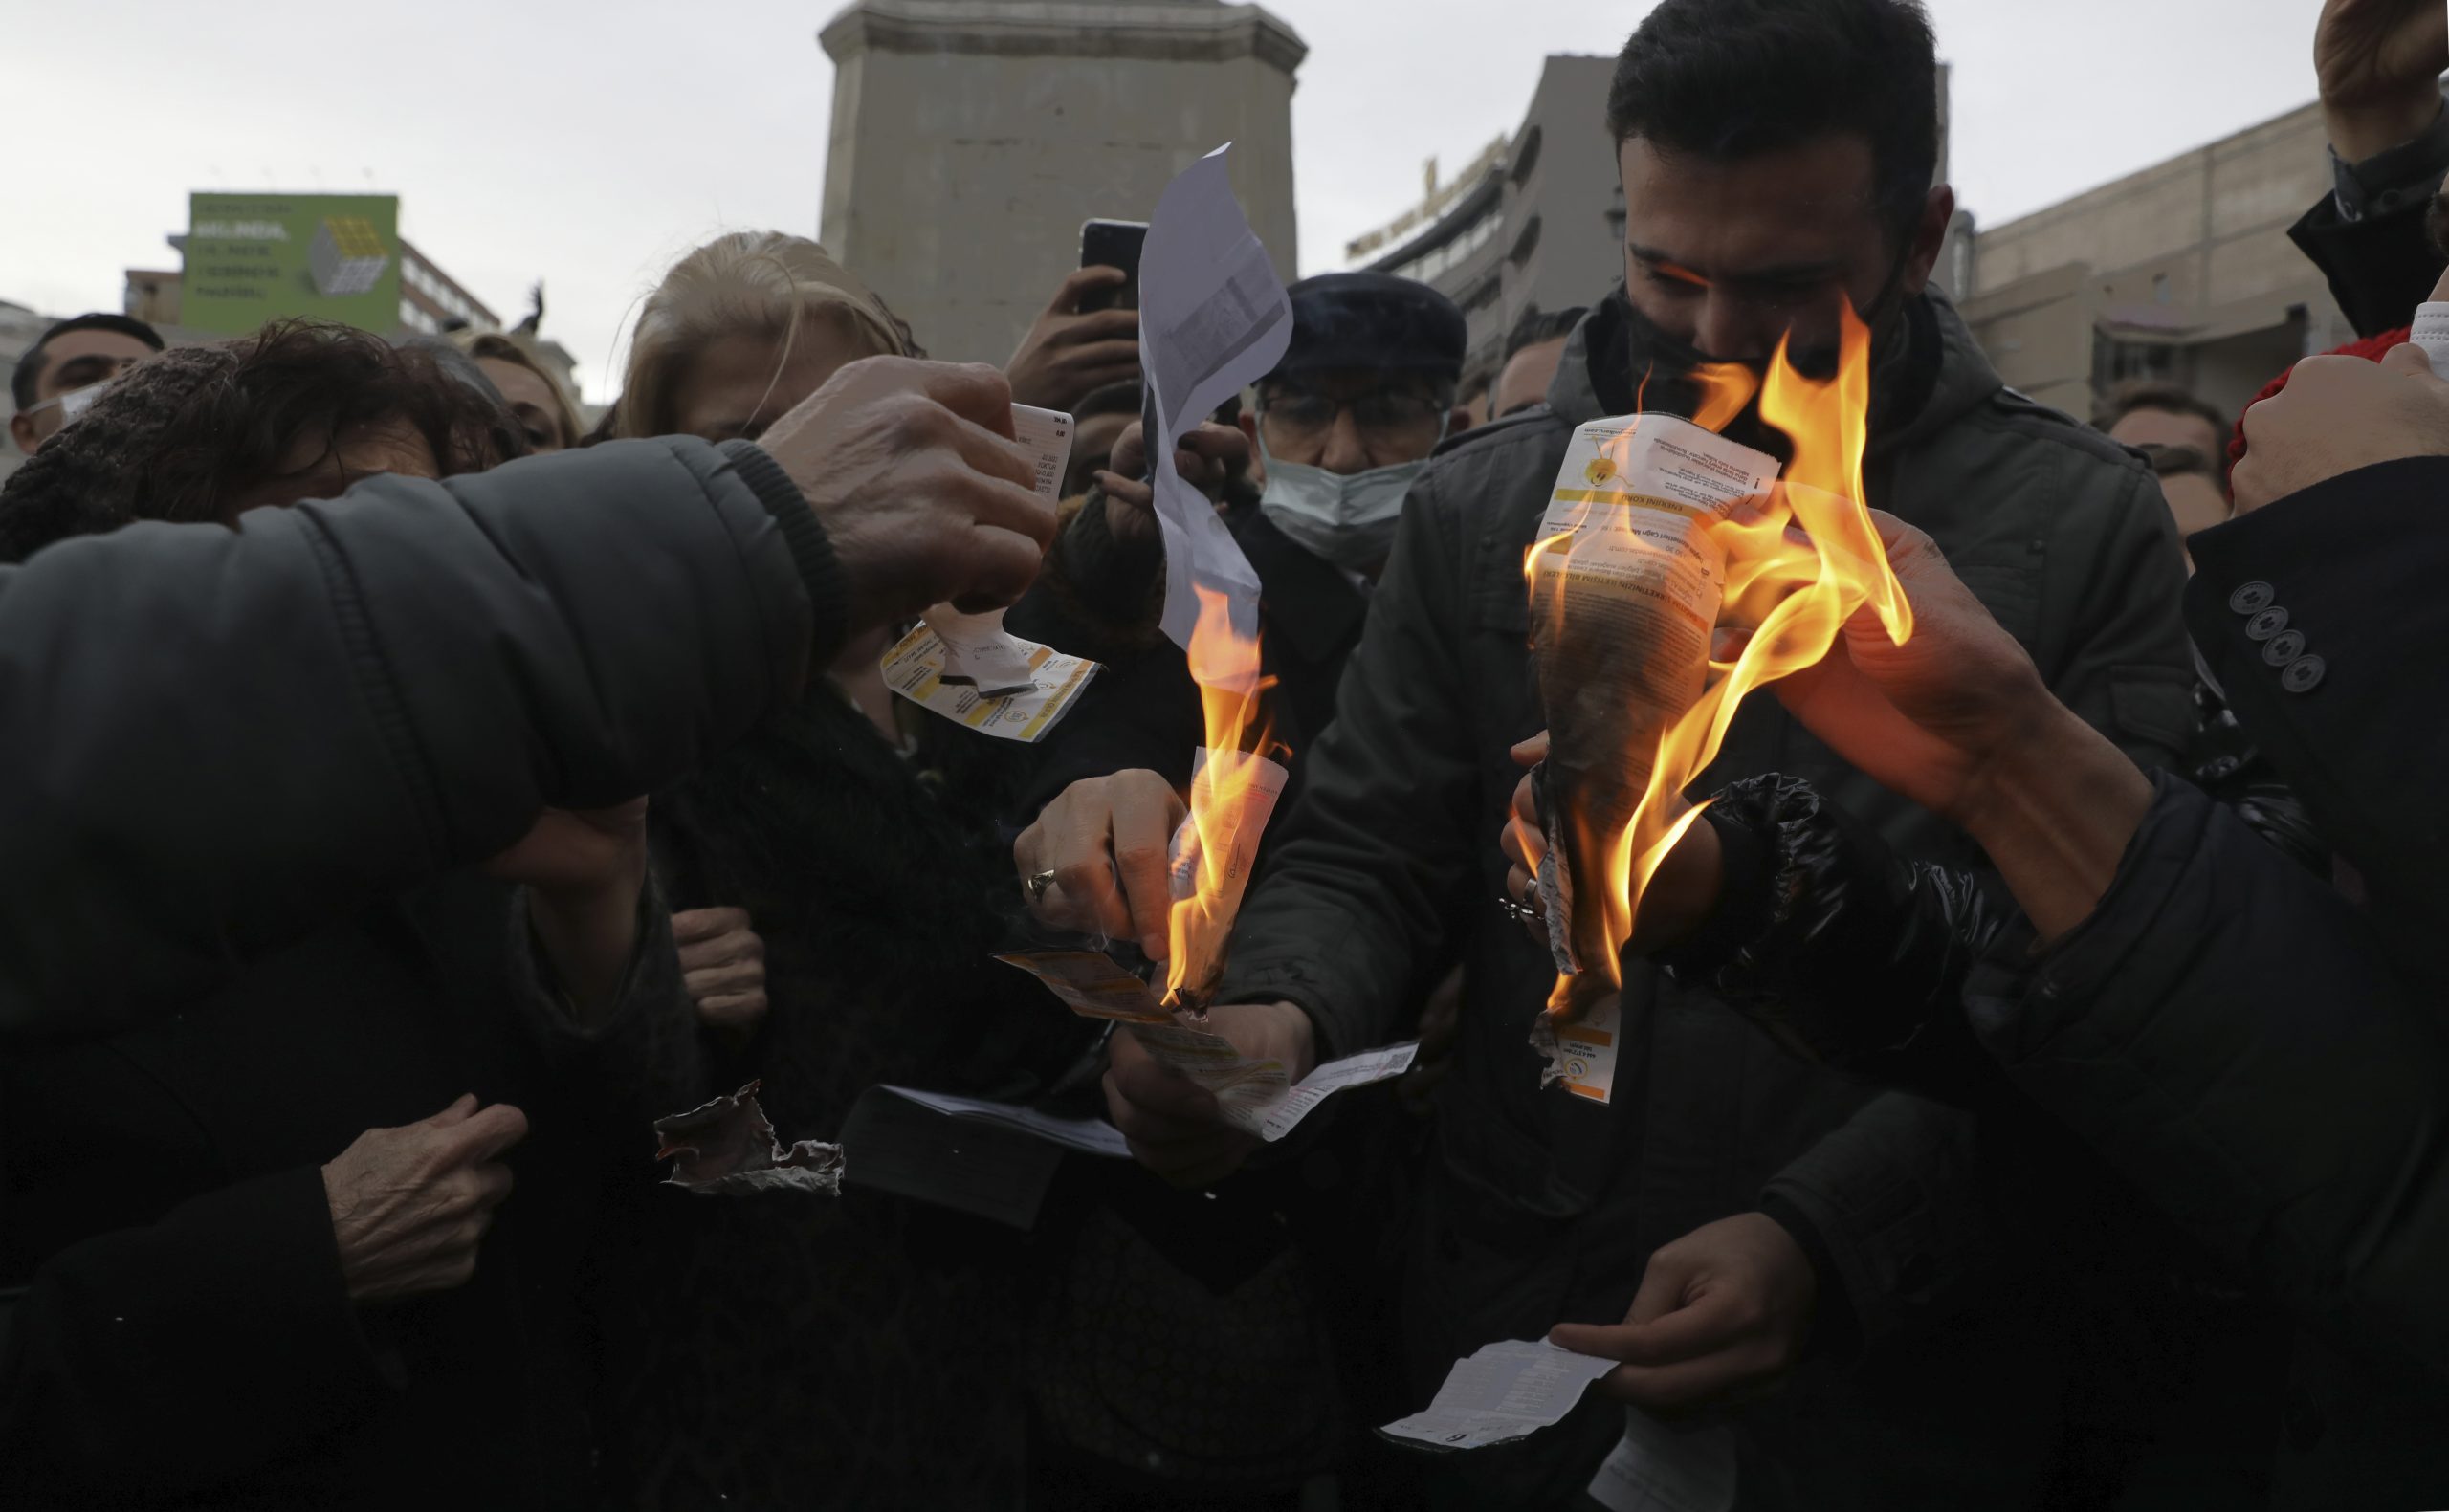 British citizens burn energy bills to protest soaring prices